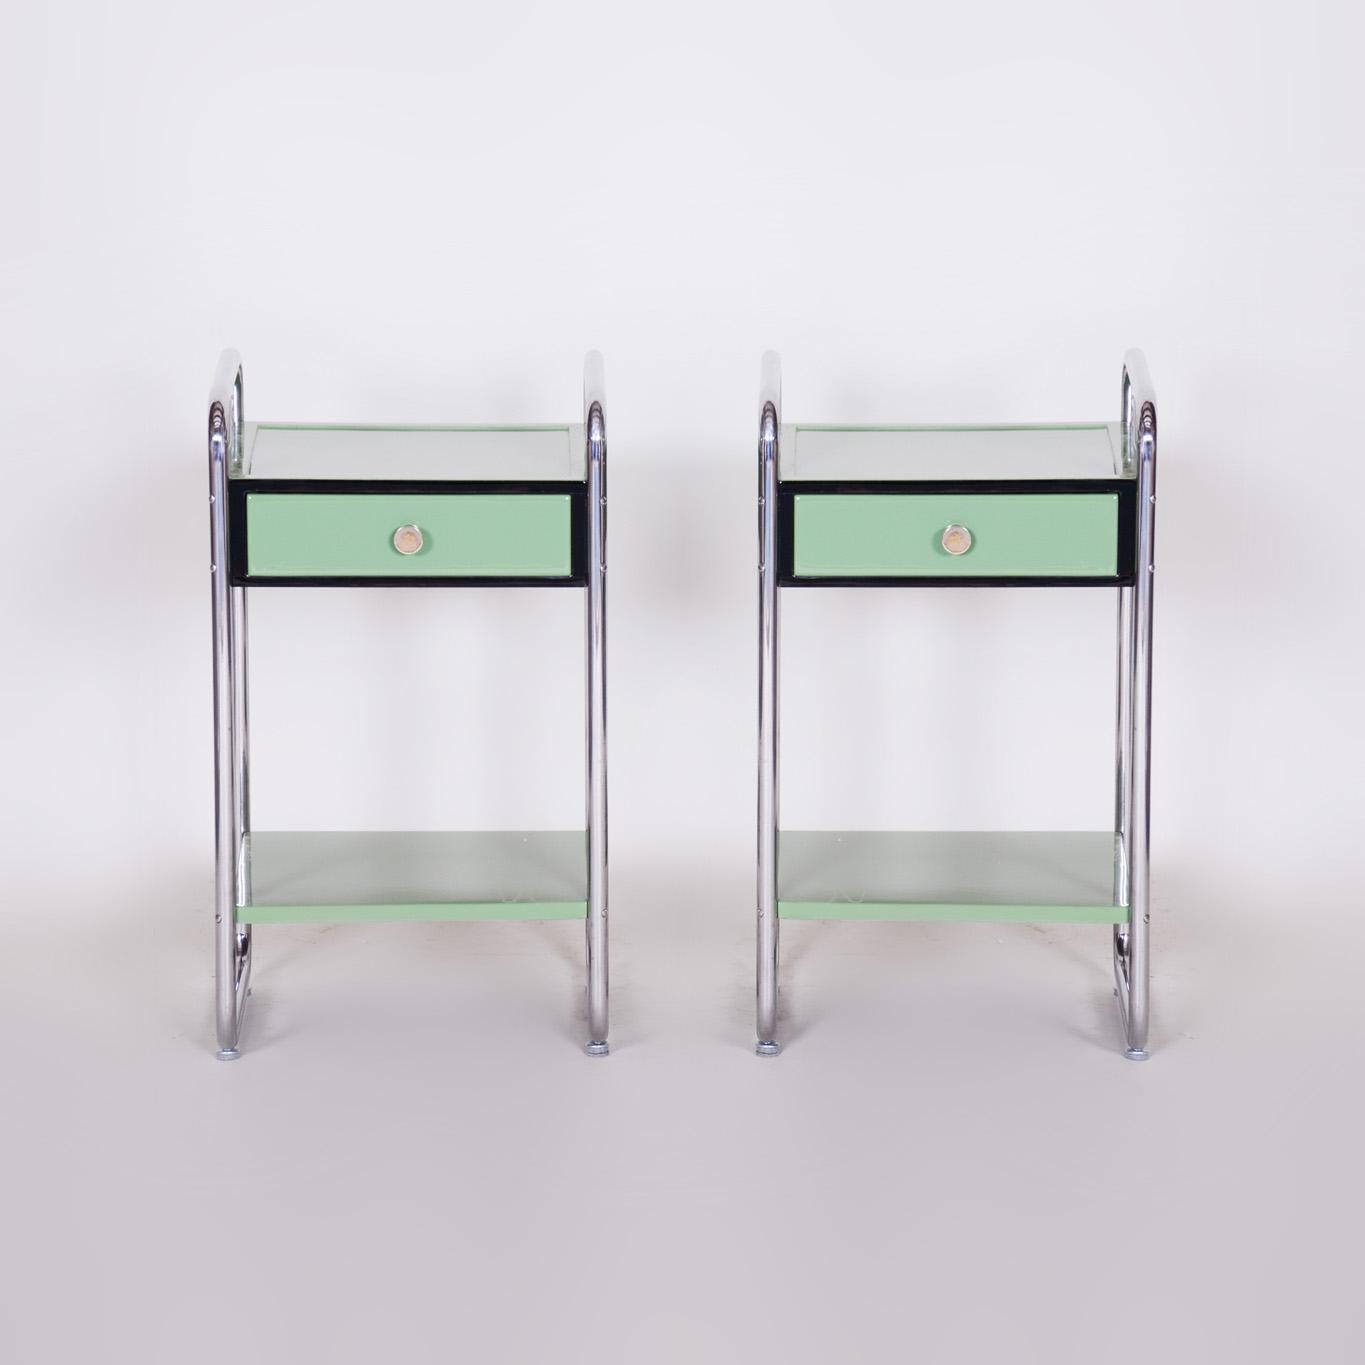 Restored Bauhaus Pair of Bed-Side Tables.

Period: 1930-39
Source: Czechia (Czechoslovakia)
Material: Chrome-Plated Steel, Lacquered Wood

It has been re-polished with polyutherane piano lacquer by our professional refurbishing team in Czechia